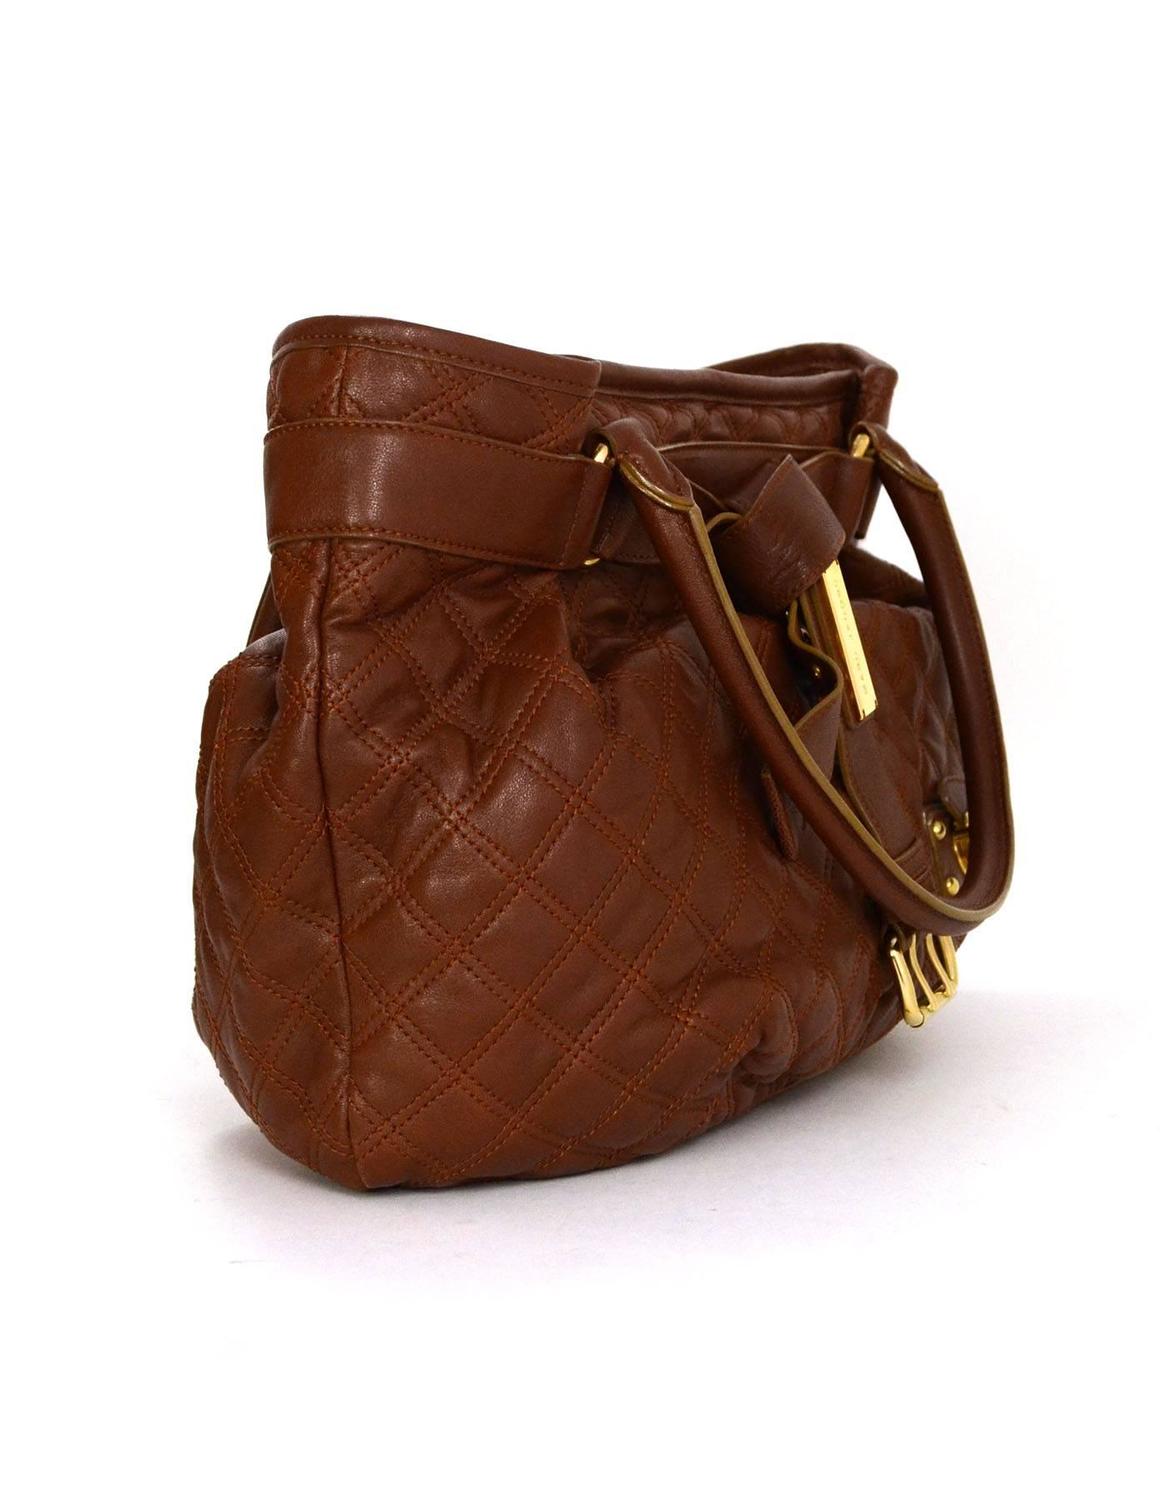 Marc Jacobs Brown Quilted Leather Tote Bag GHW For Sale at 1stdibs